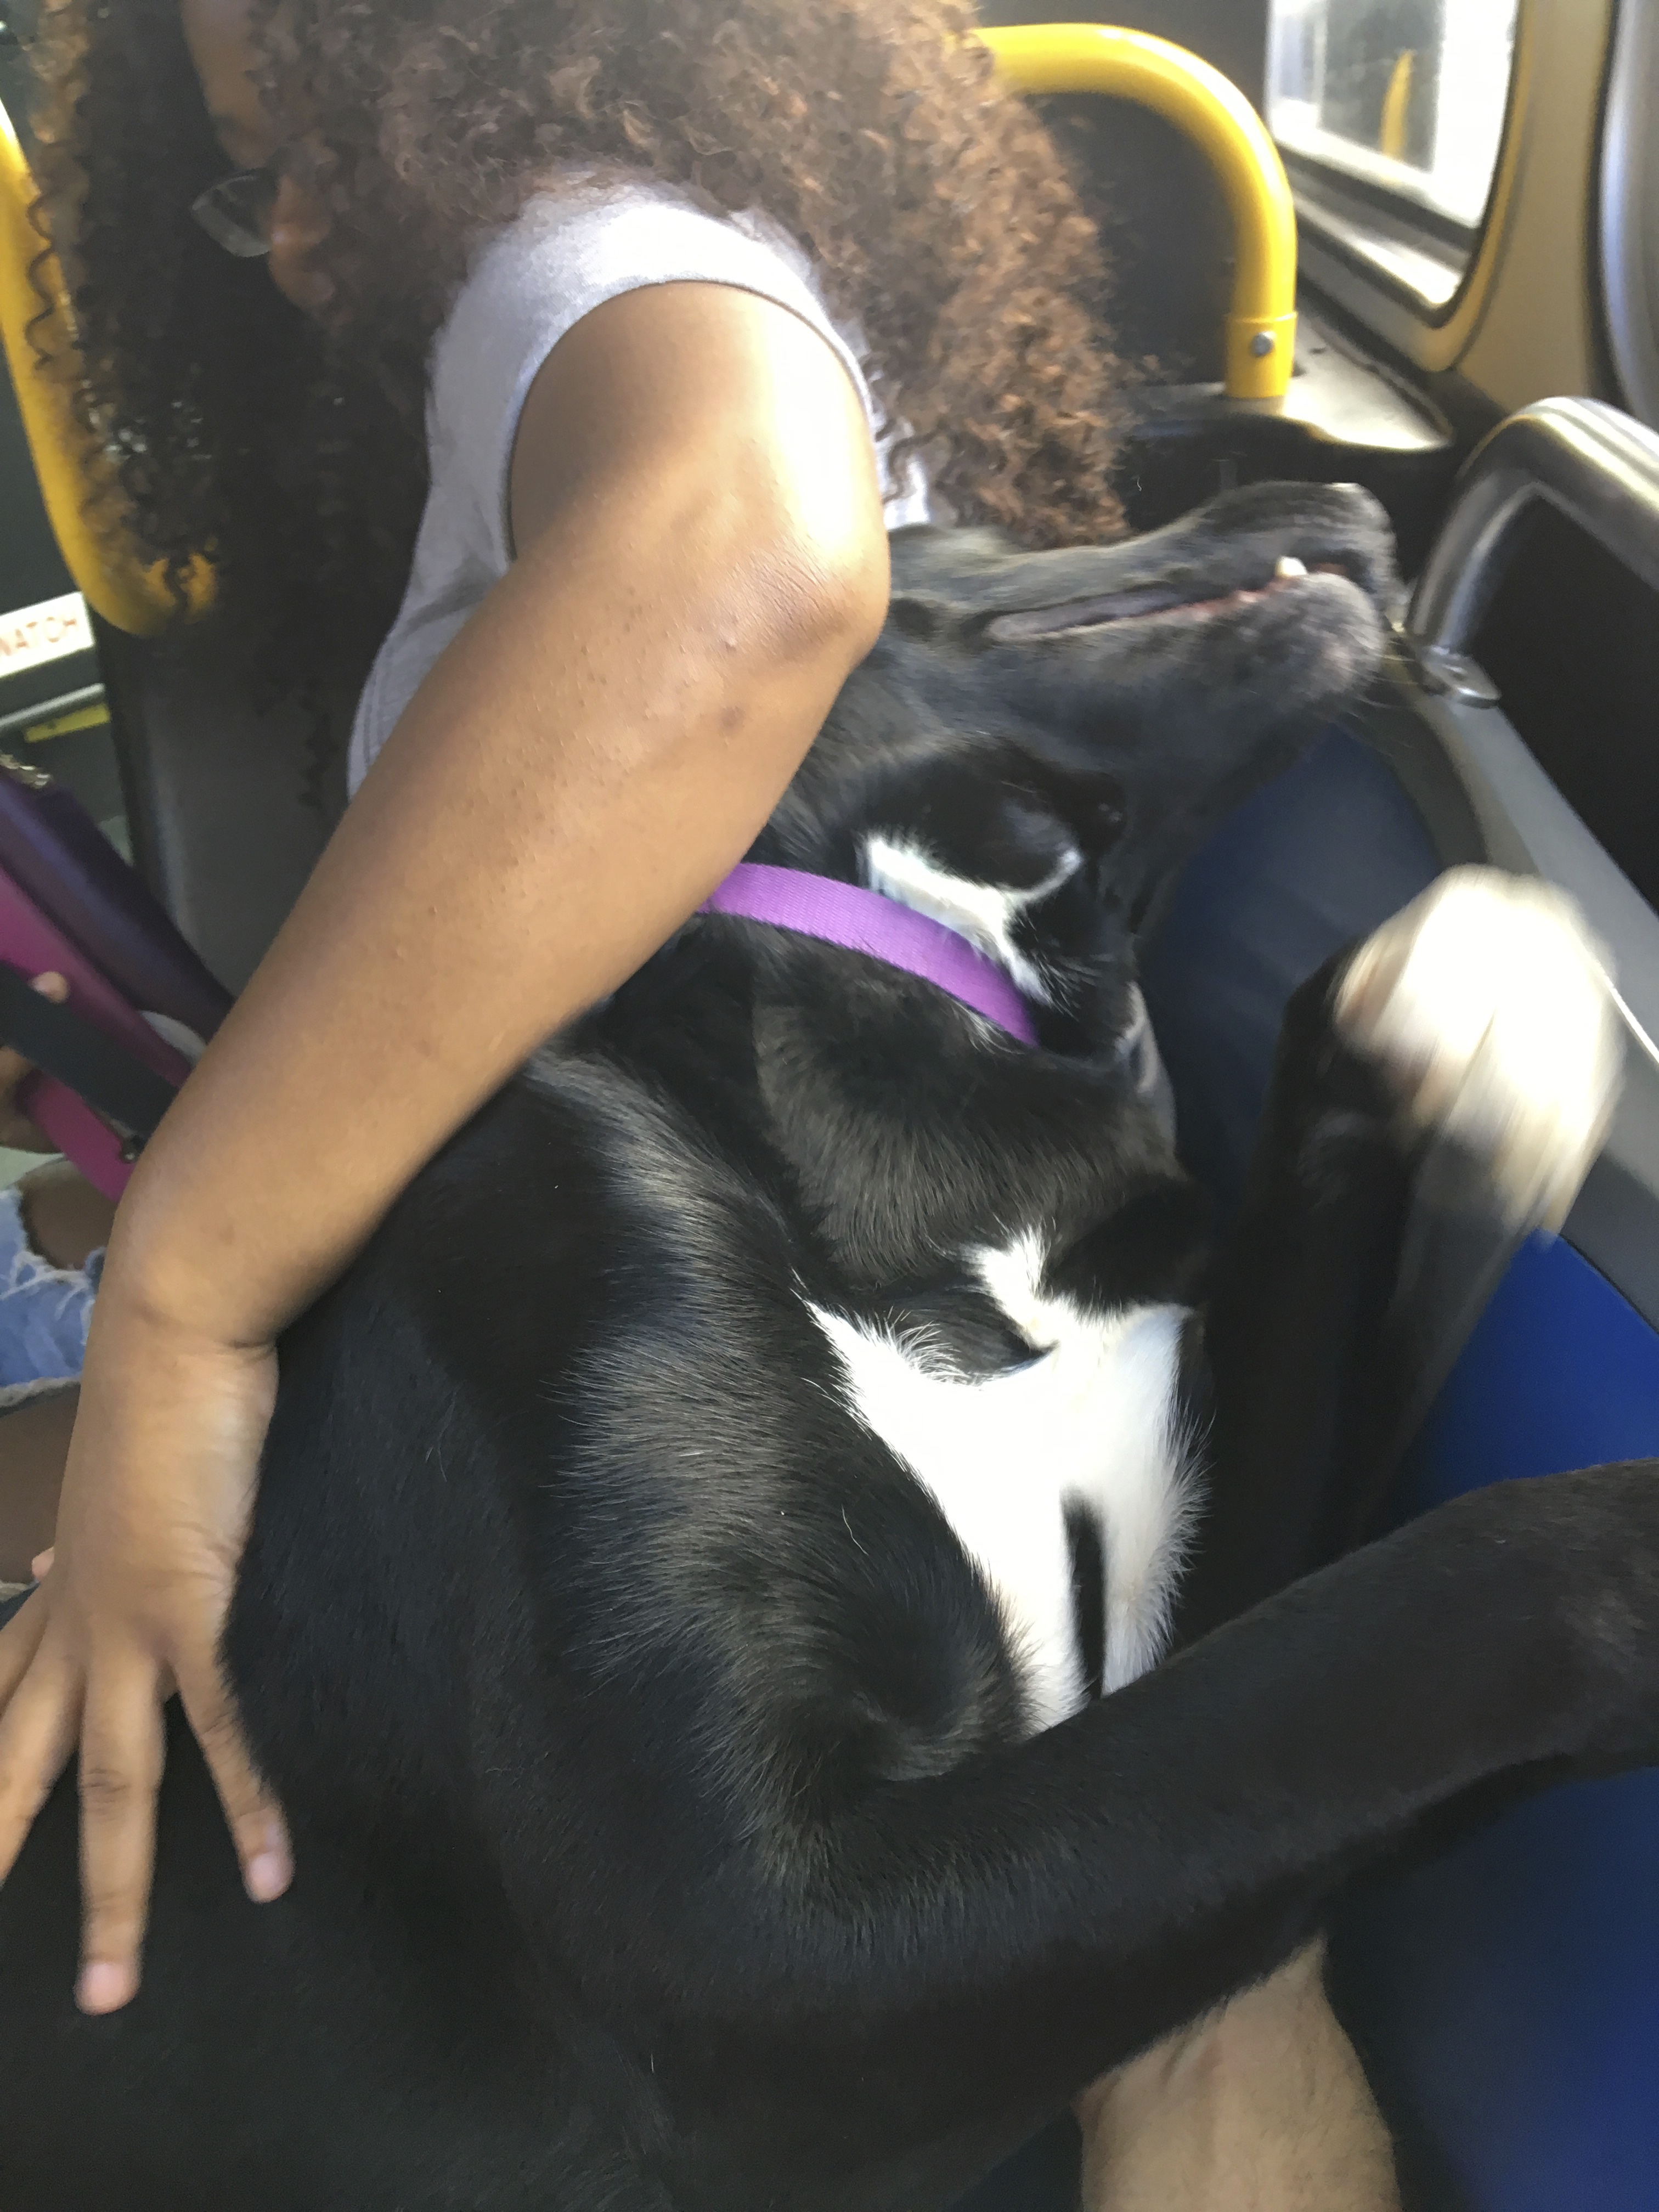 Labrador Retriever Siberian Husky Mix Laying On A Bus Seat And Leaning Back Against A Woman